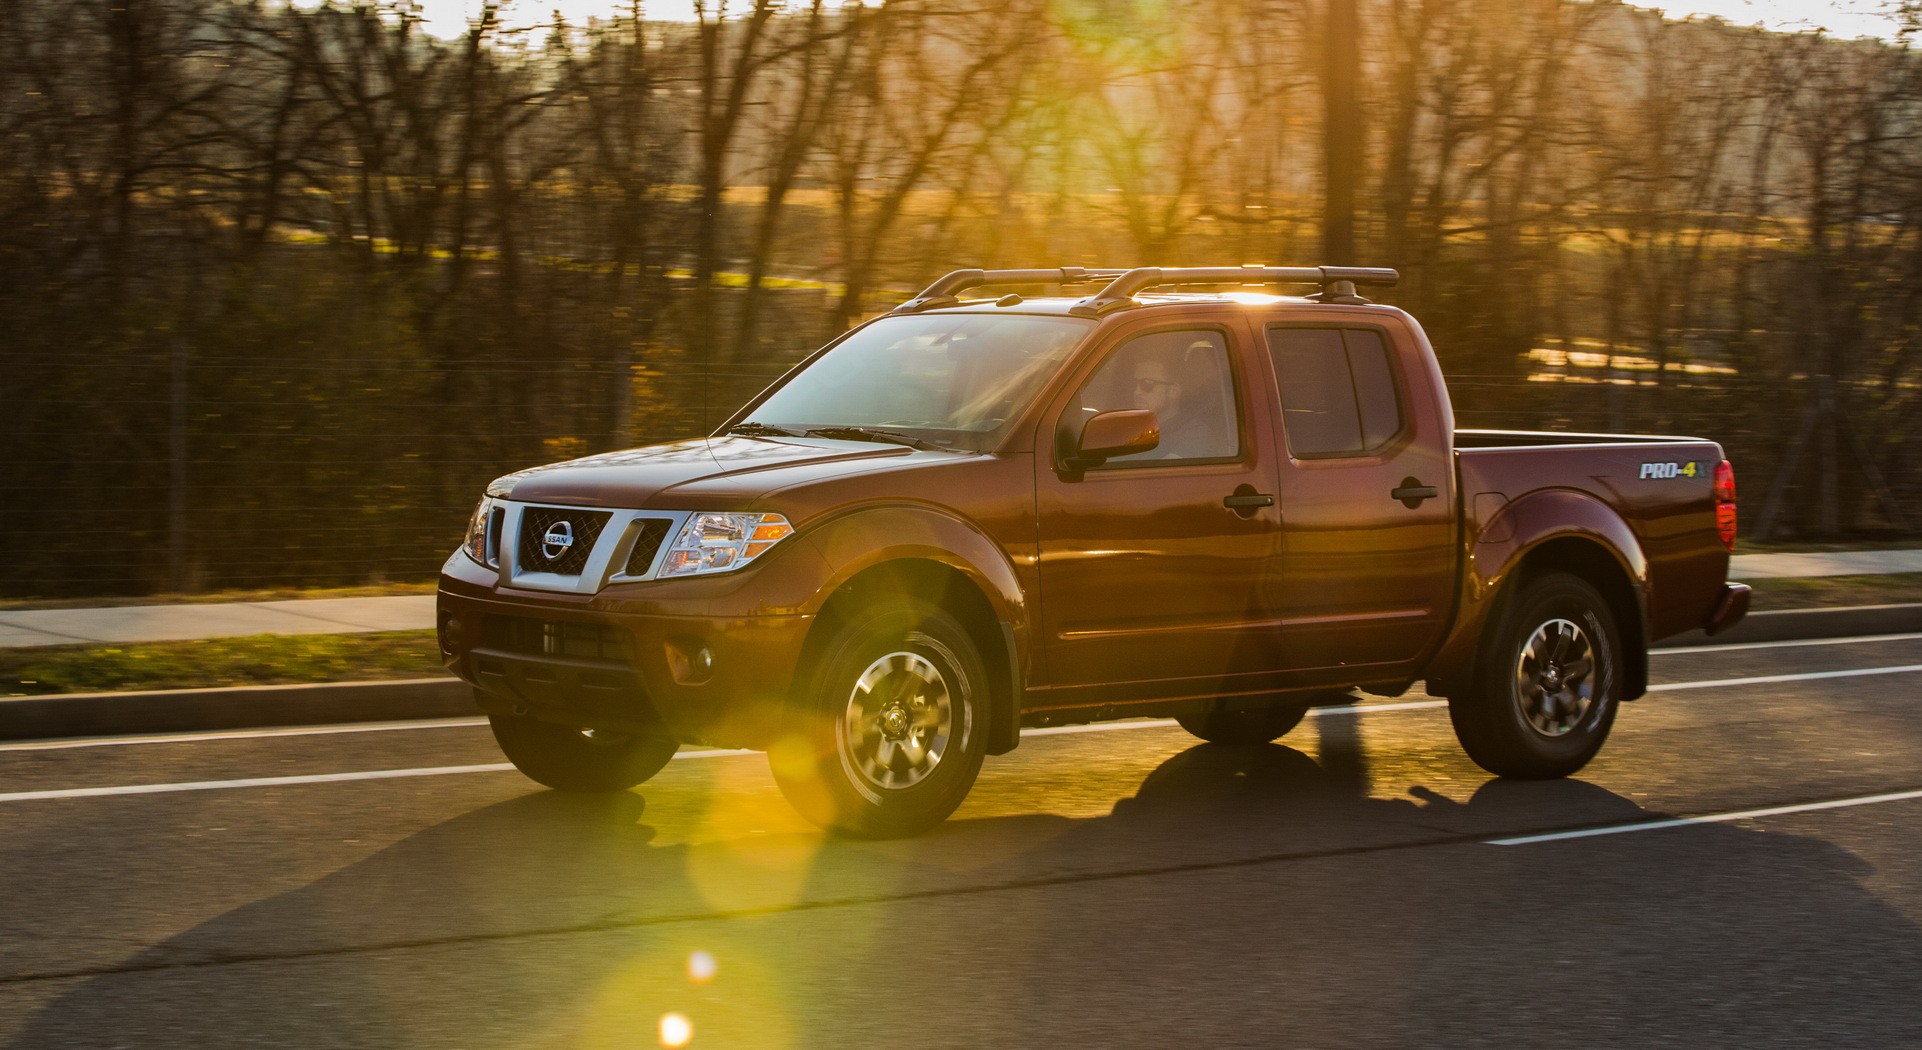 2020 Nissan Frontier With 2021 Nissan Frontier’s V6 Averages 20 MPG Combine...